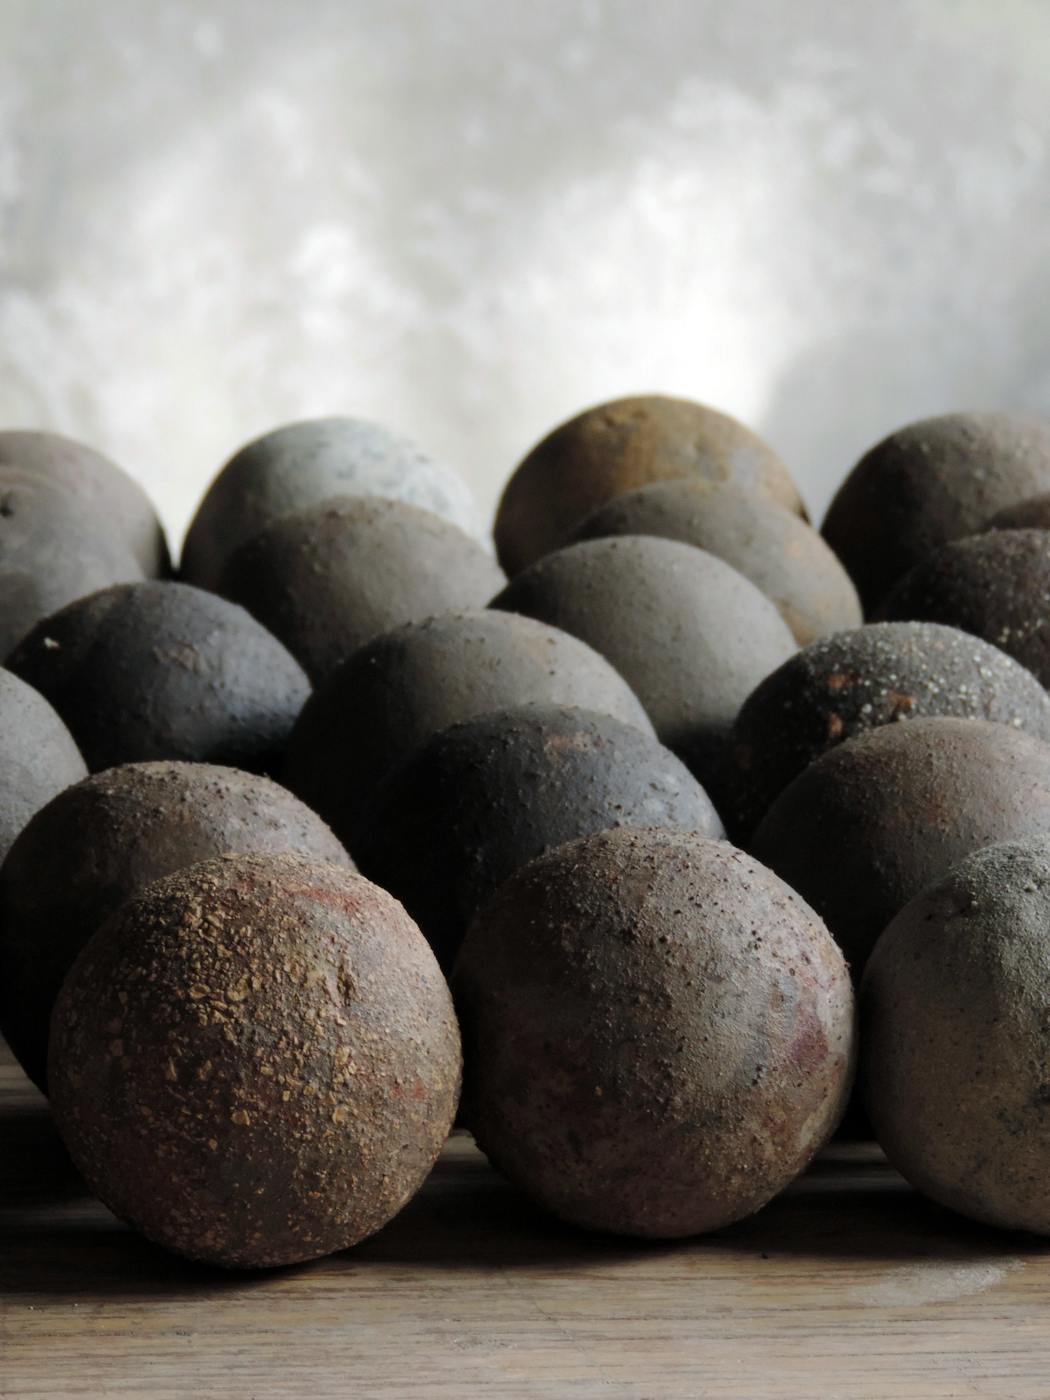 A handout photo provided by the ceramic artist Mitch Iburg shows raw, unfired clay spheres, which reveal the diversity of the materials that Iburg extracts from a mine in Minnesota.